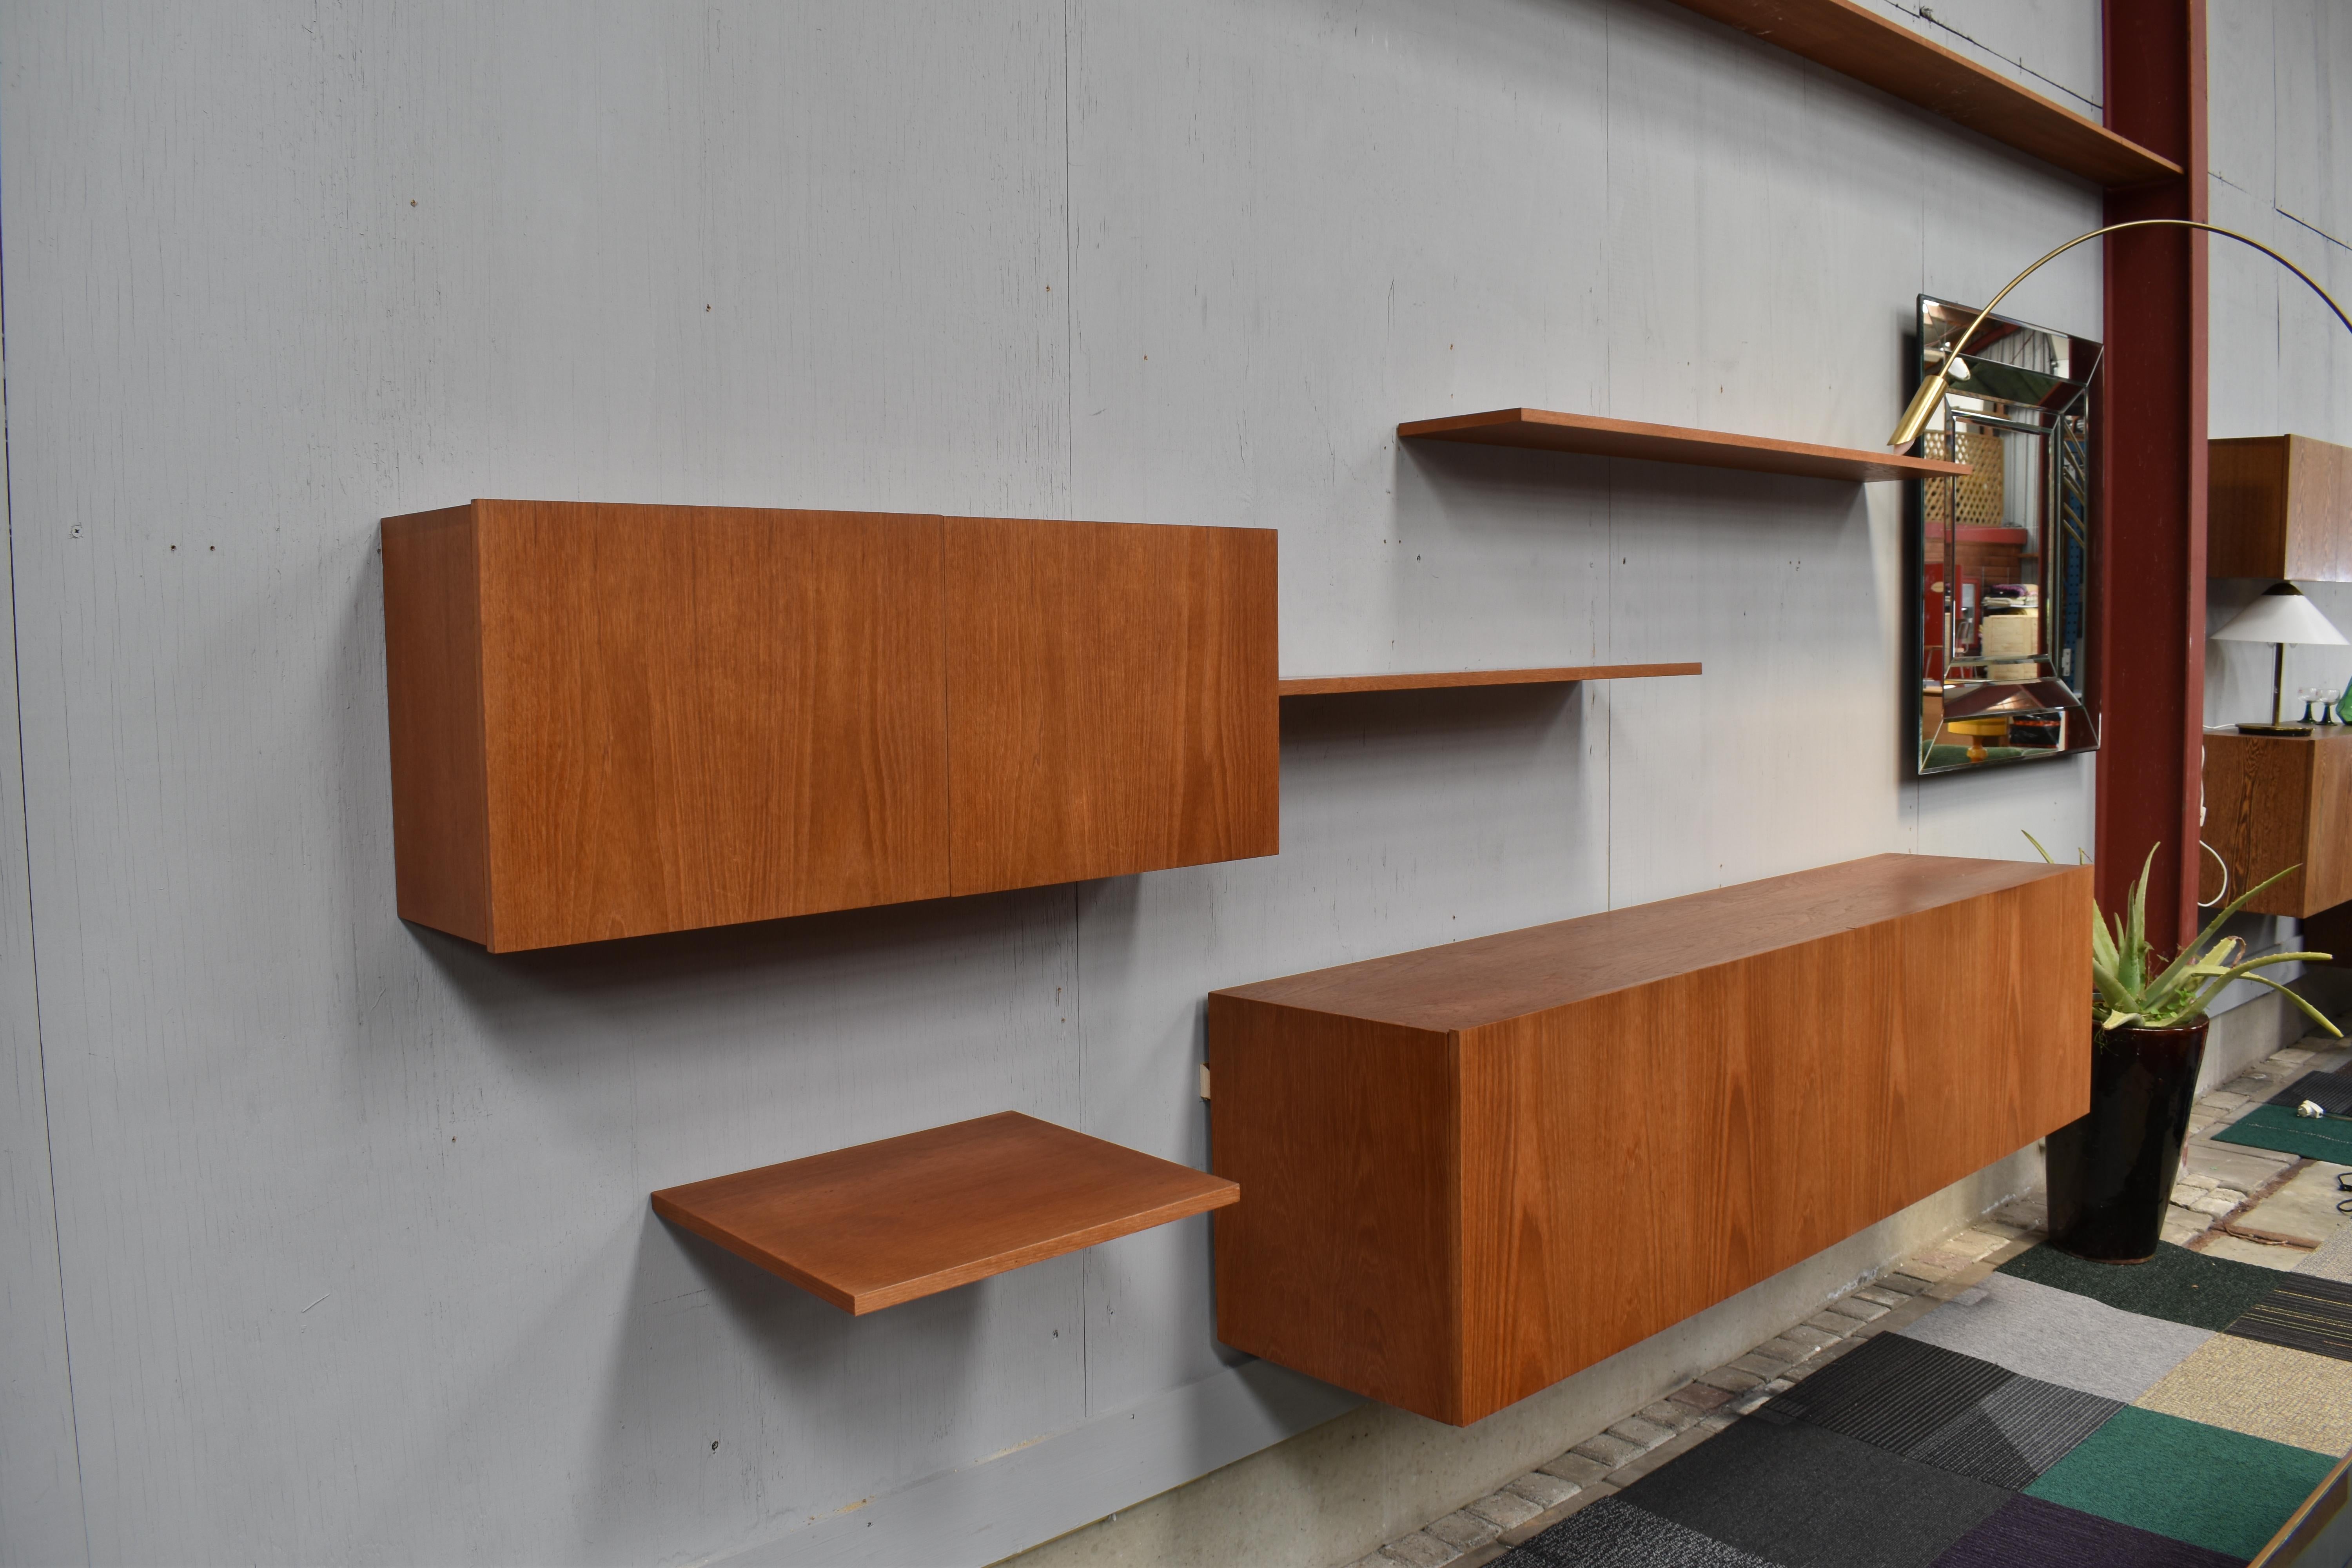 Late 20th Century Floating Wall Unit in Teak by Banz Bord, Germany, circa 1970